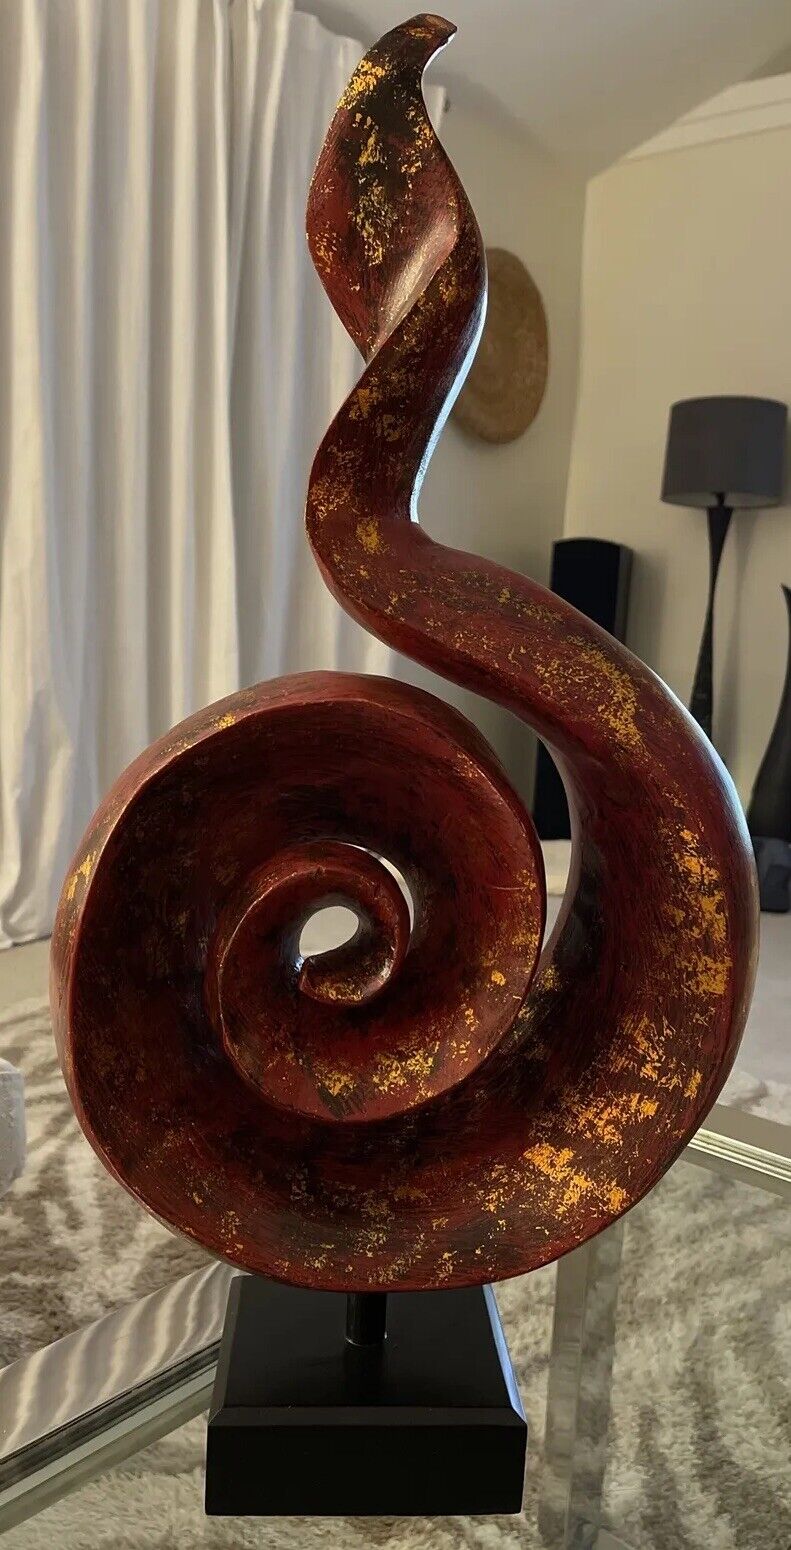 VTG PIER 1 Large Modern Swirl Wooden Red Gold Abstract Sculpture Statue AMAZING